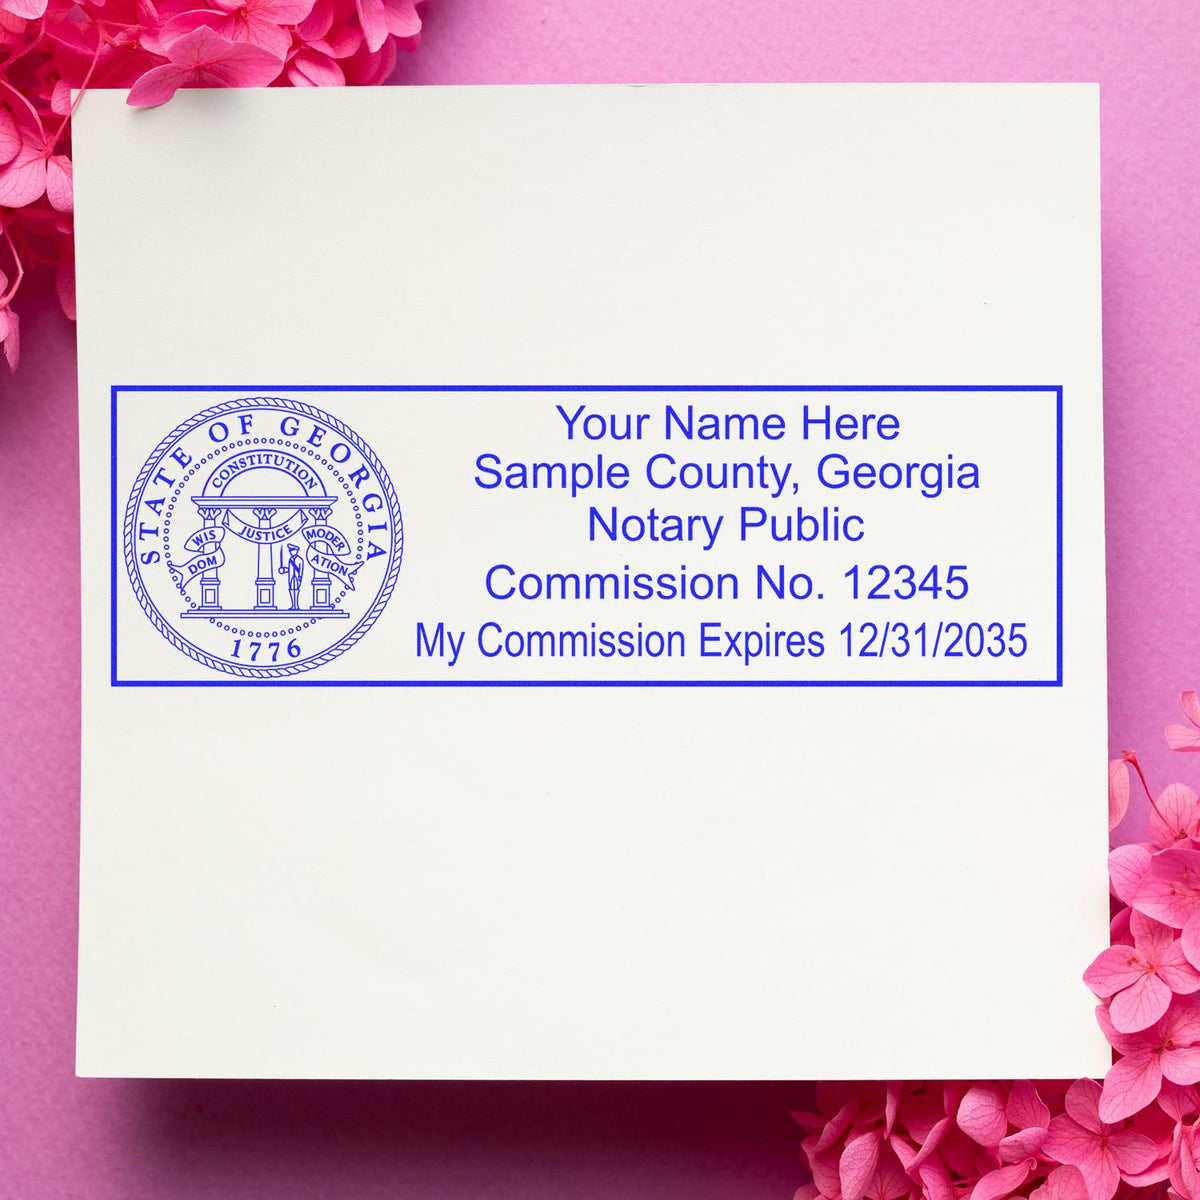 The PSI Georgia Notary Stamp stamp impression comes to life with a crisp, detailed photo on paper - showcasing true professional quality.